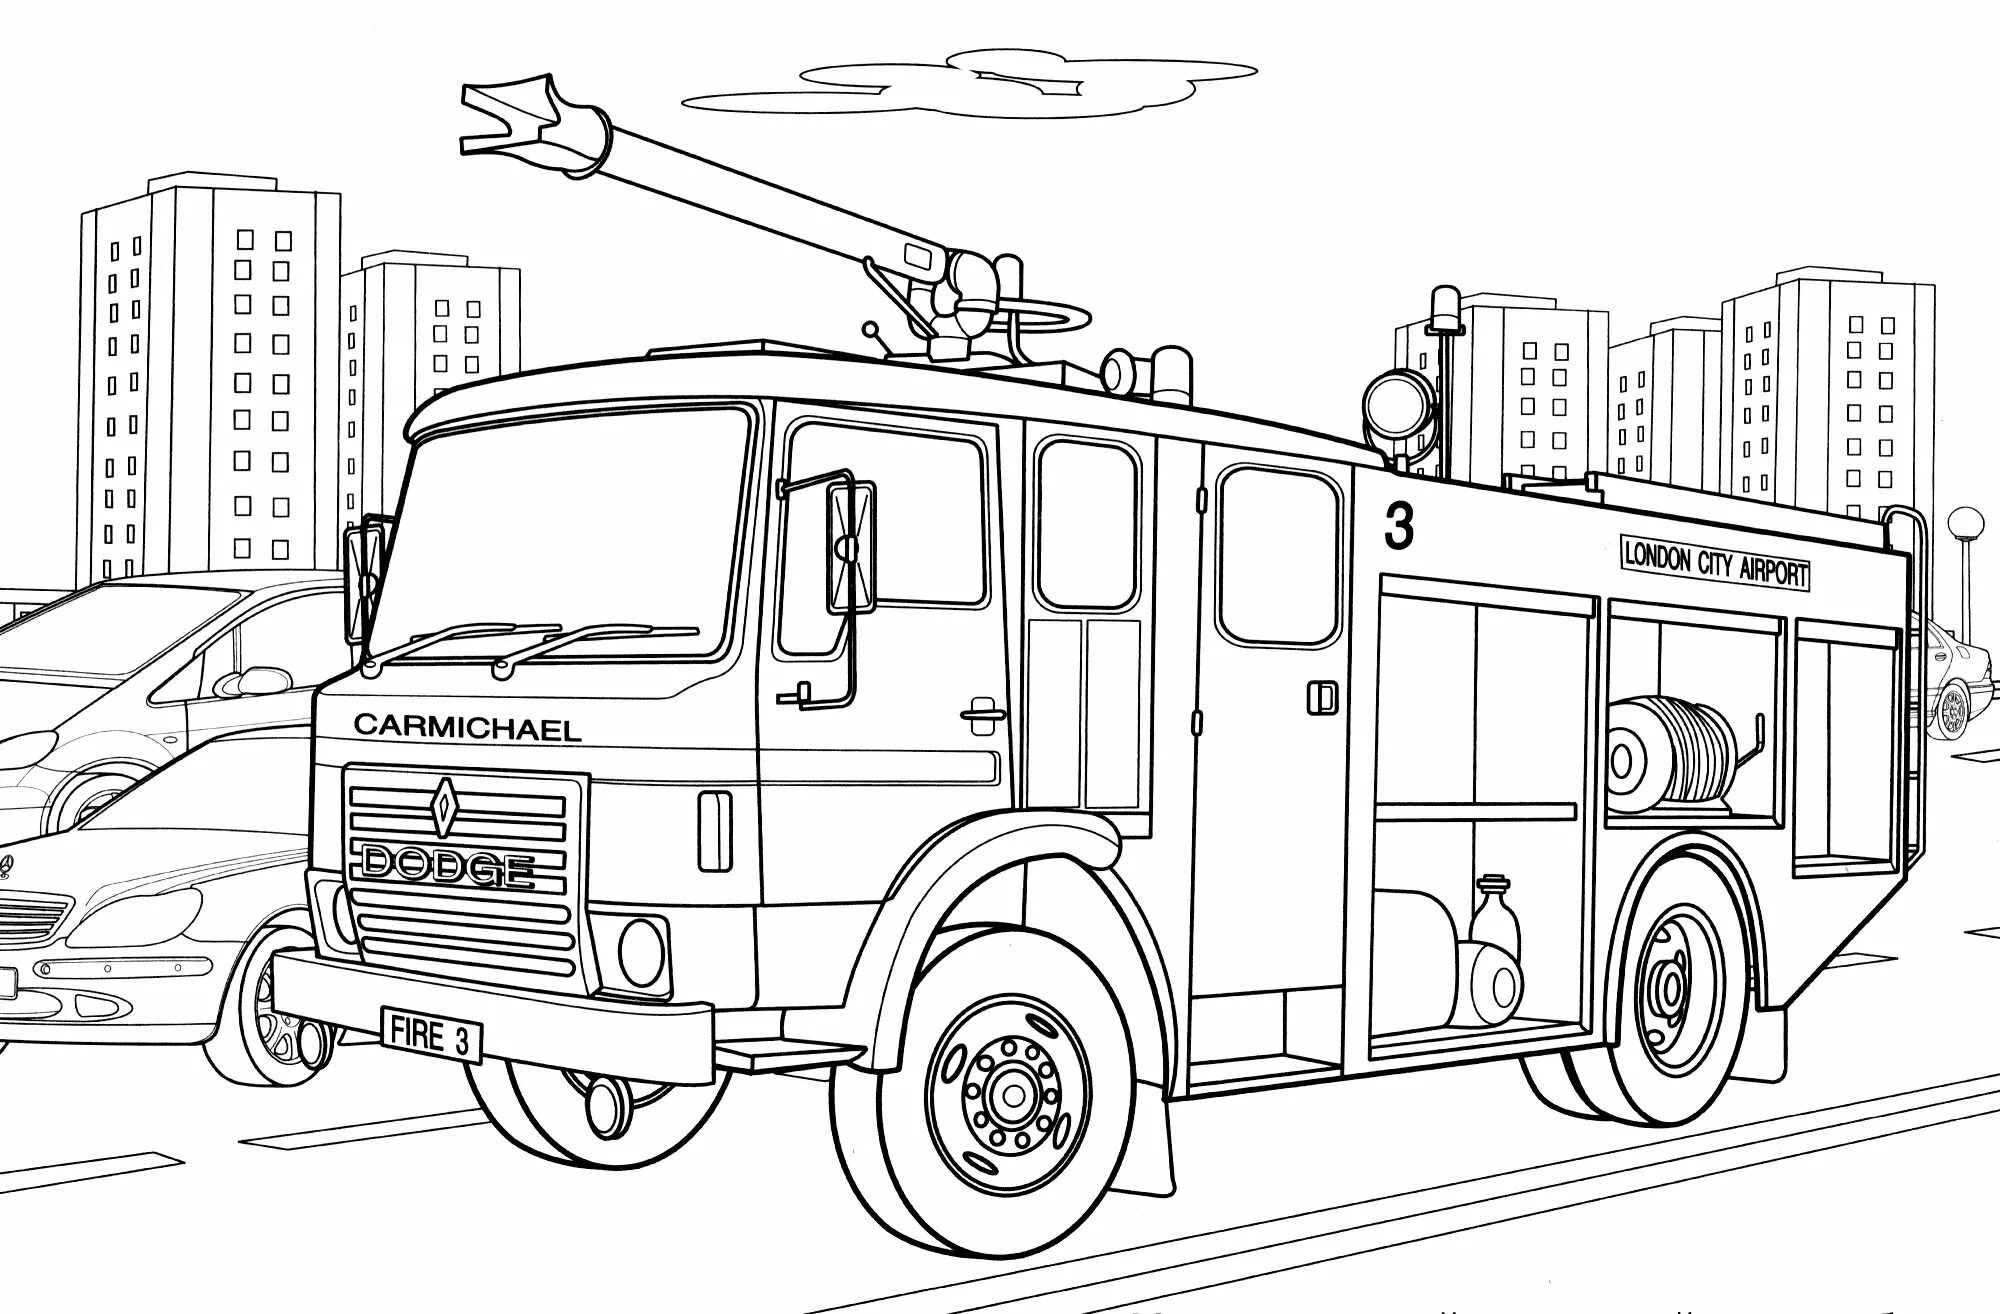 Colouring bright firefighting equipment